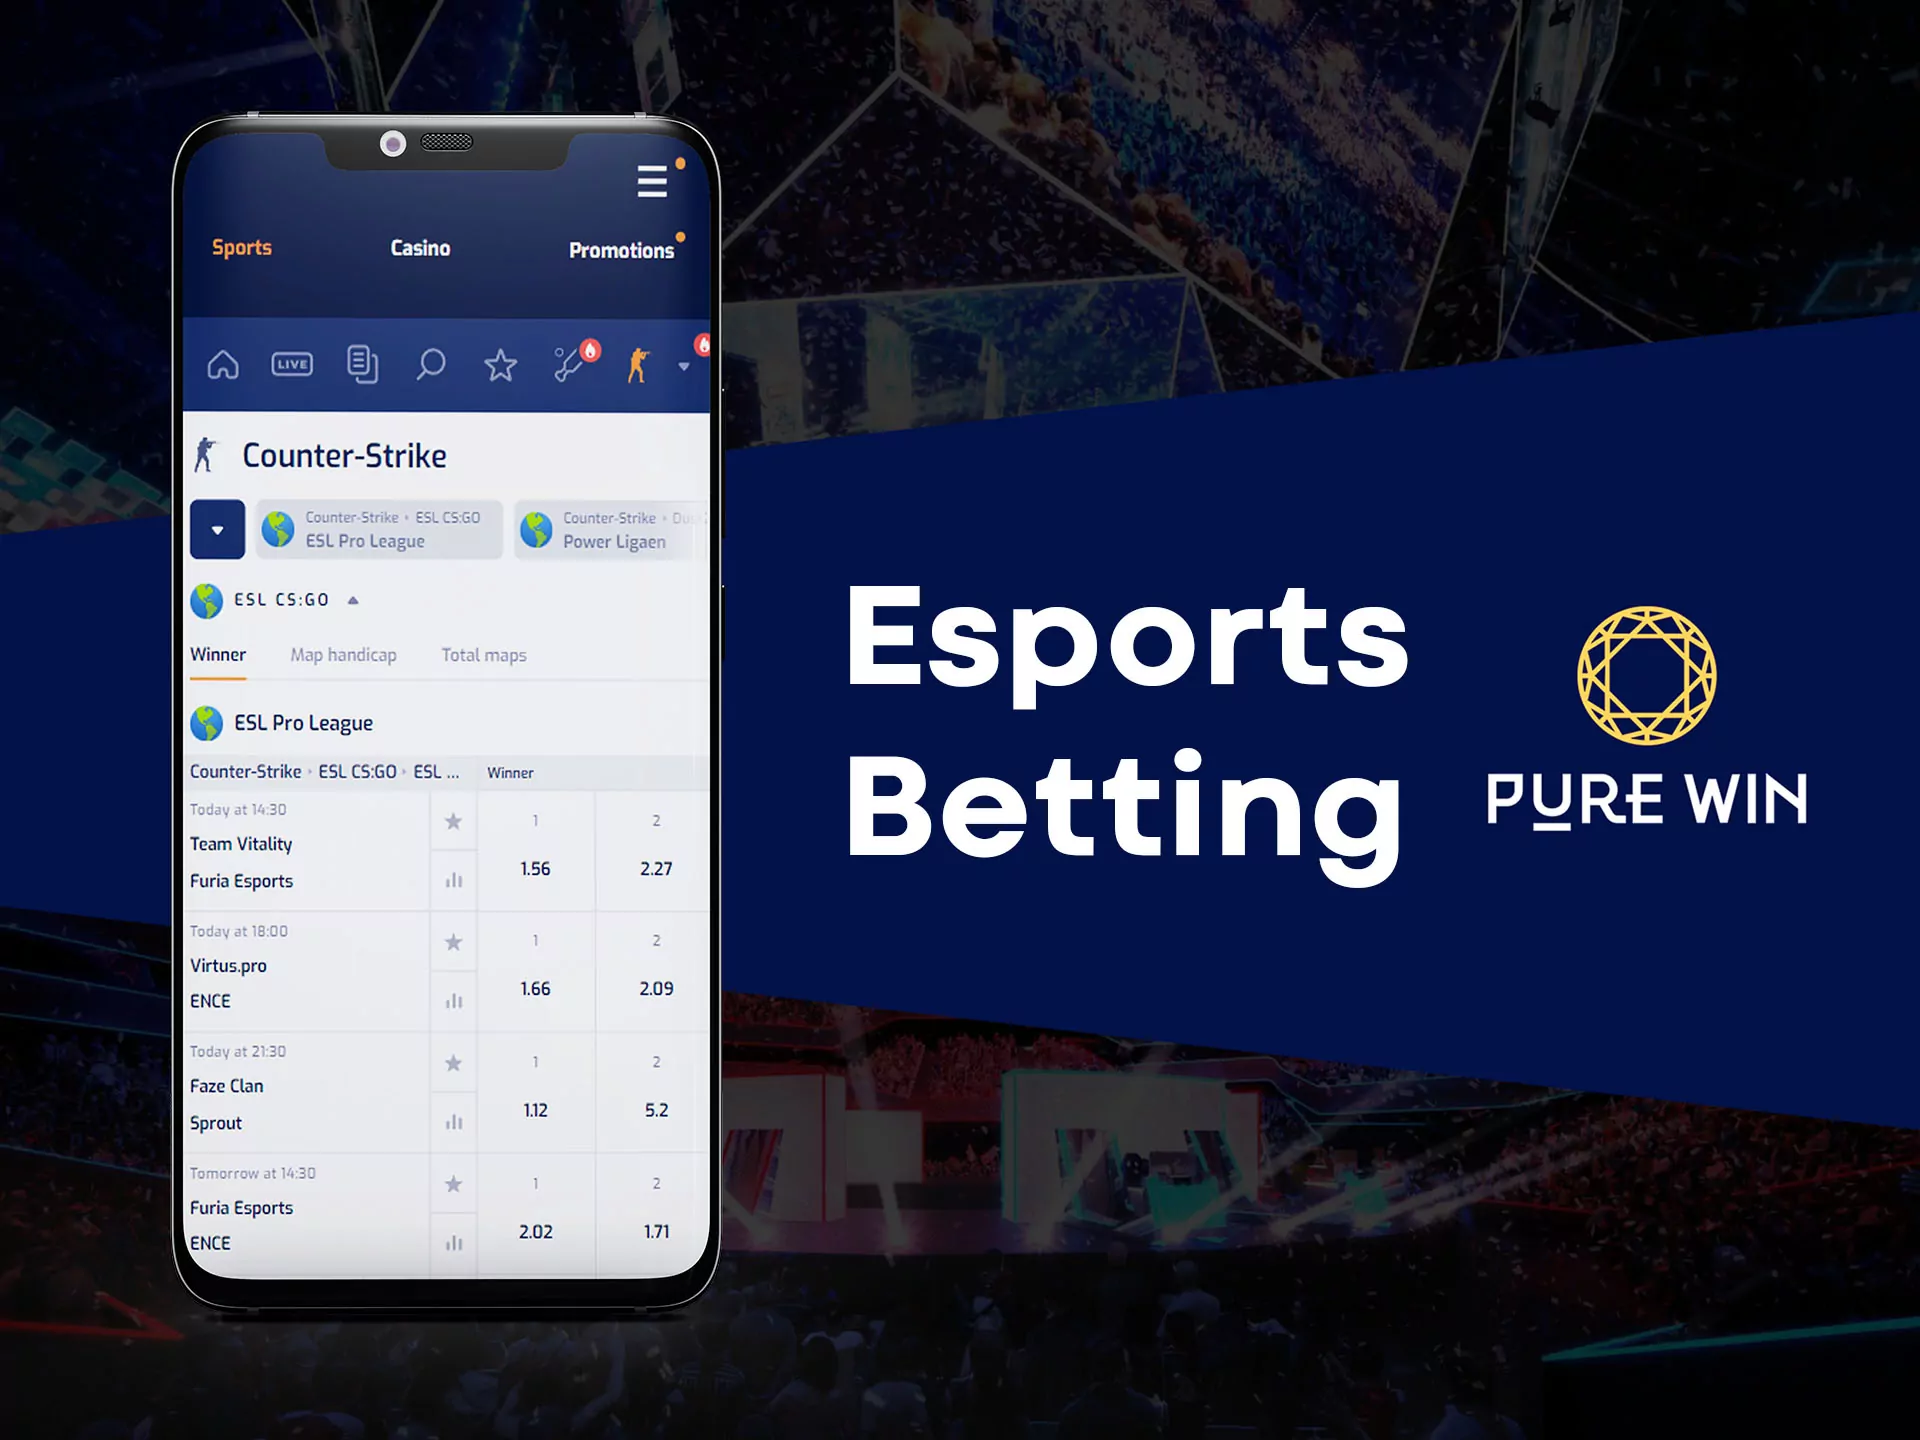 Watch and bet on your favourite esports team.